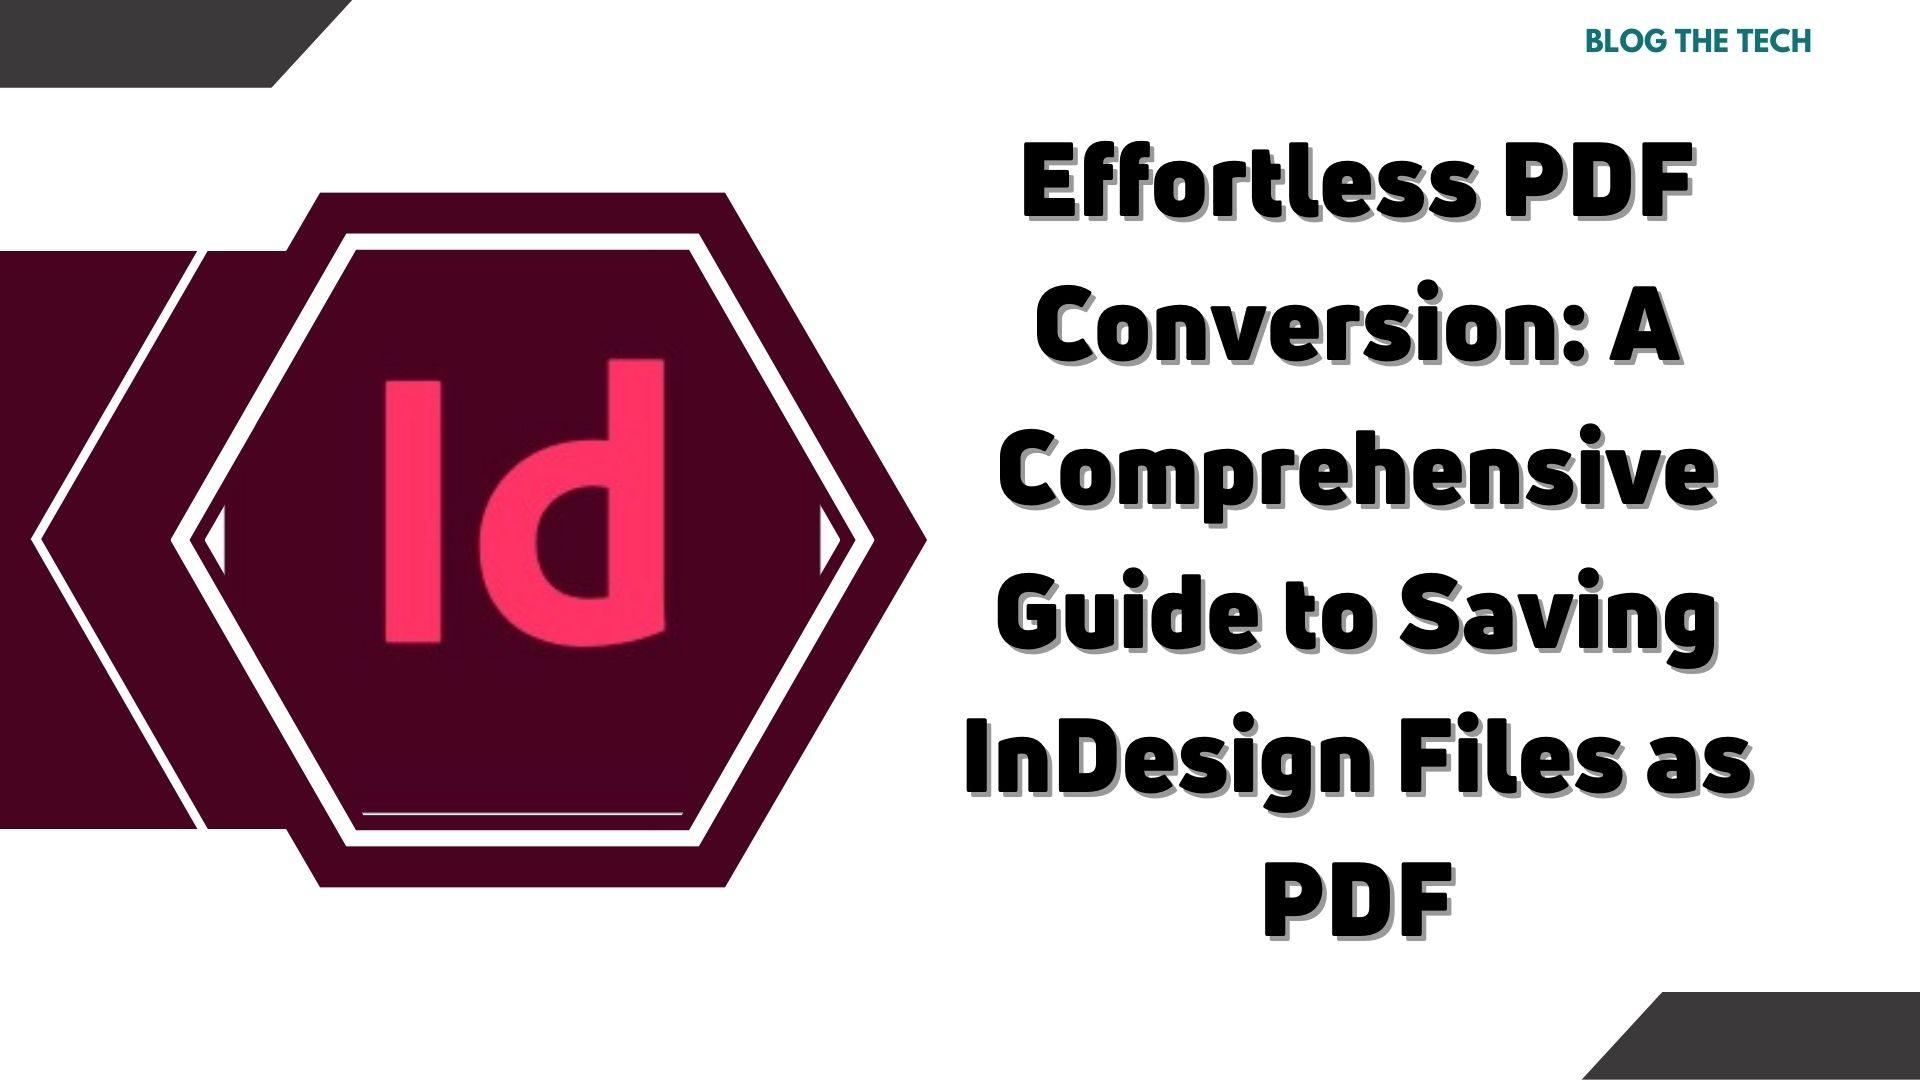 Effortless PDF Conversion: A Comprehensive Guide to Saving InDesign Files as PDF